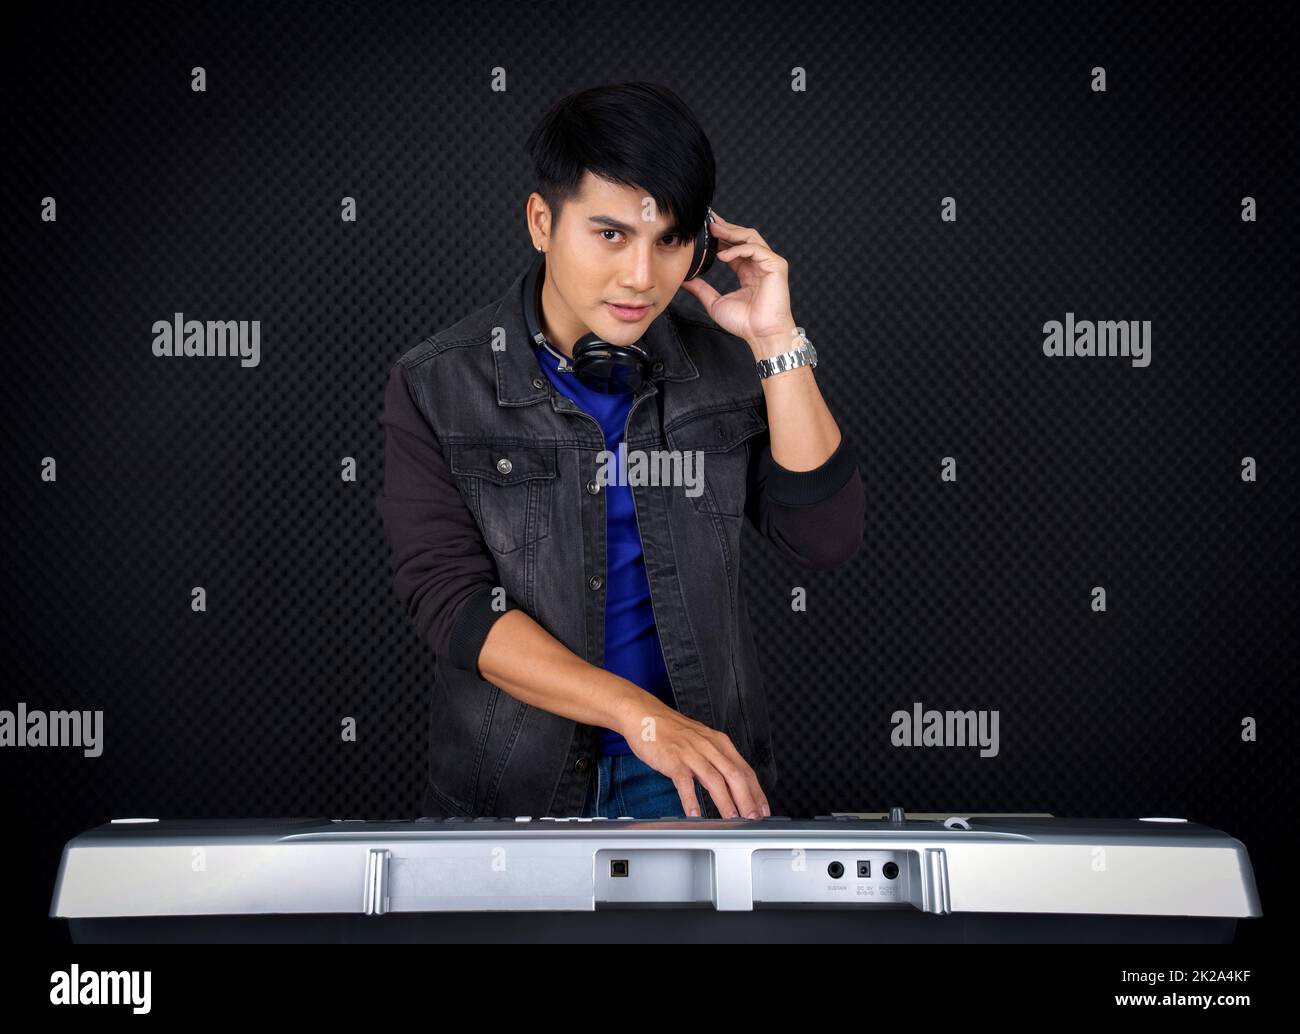 Young asian man with headphones playing an electric keyboard in front of black soundproofing wall. Musician producing music in professional recording studio. Stock Photo